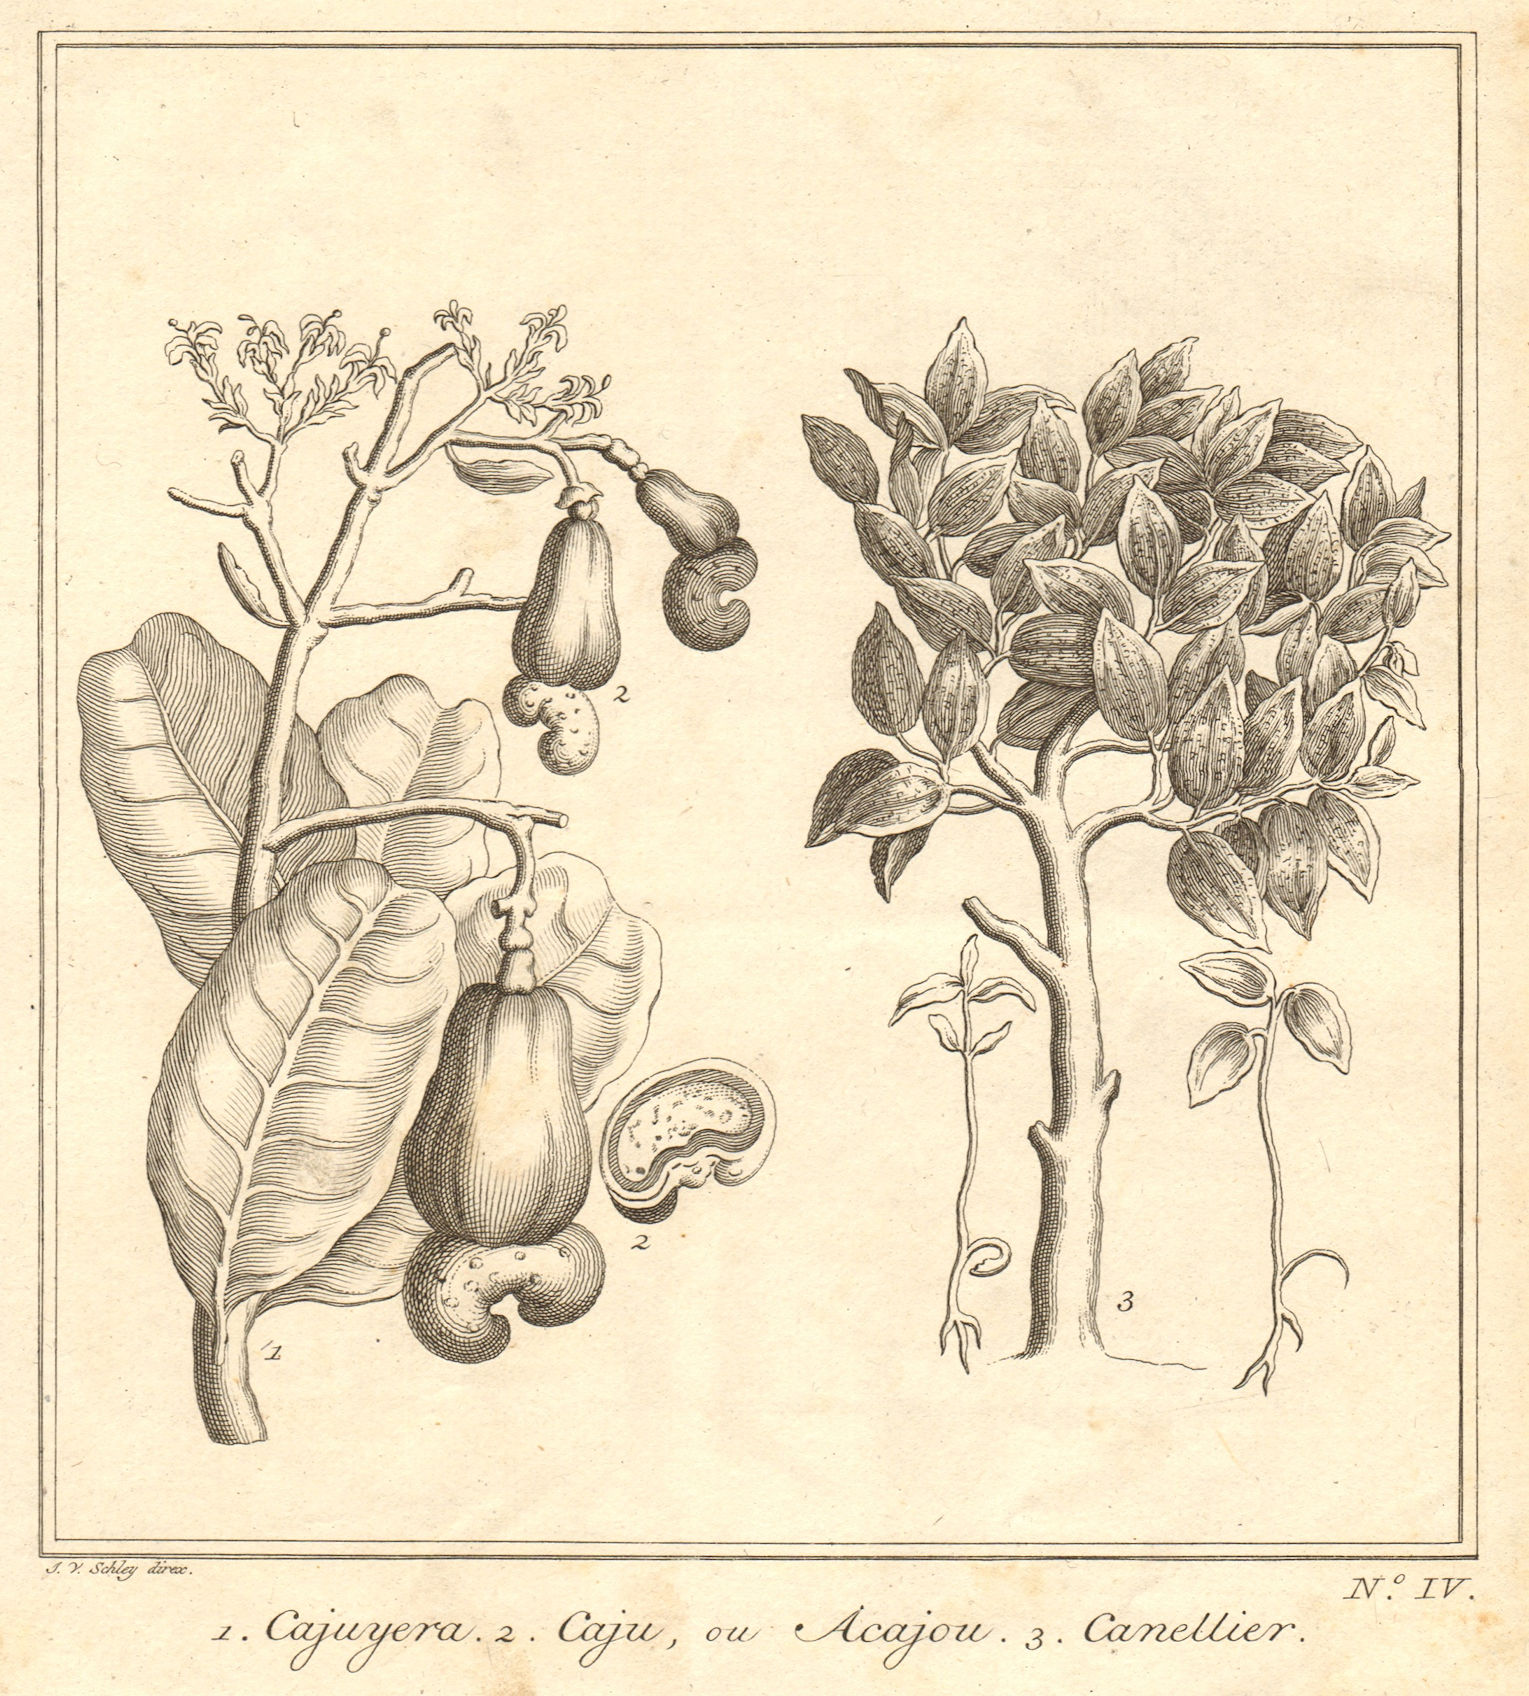 Indonesia. East Indies. Cashew tree & nuts. Cinnamon spice tree. SCHLEY 1763